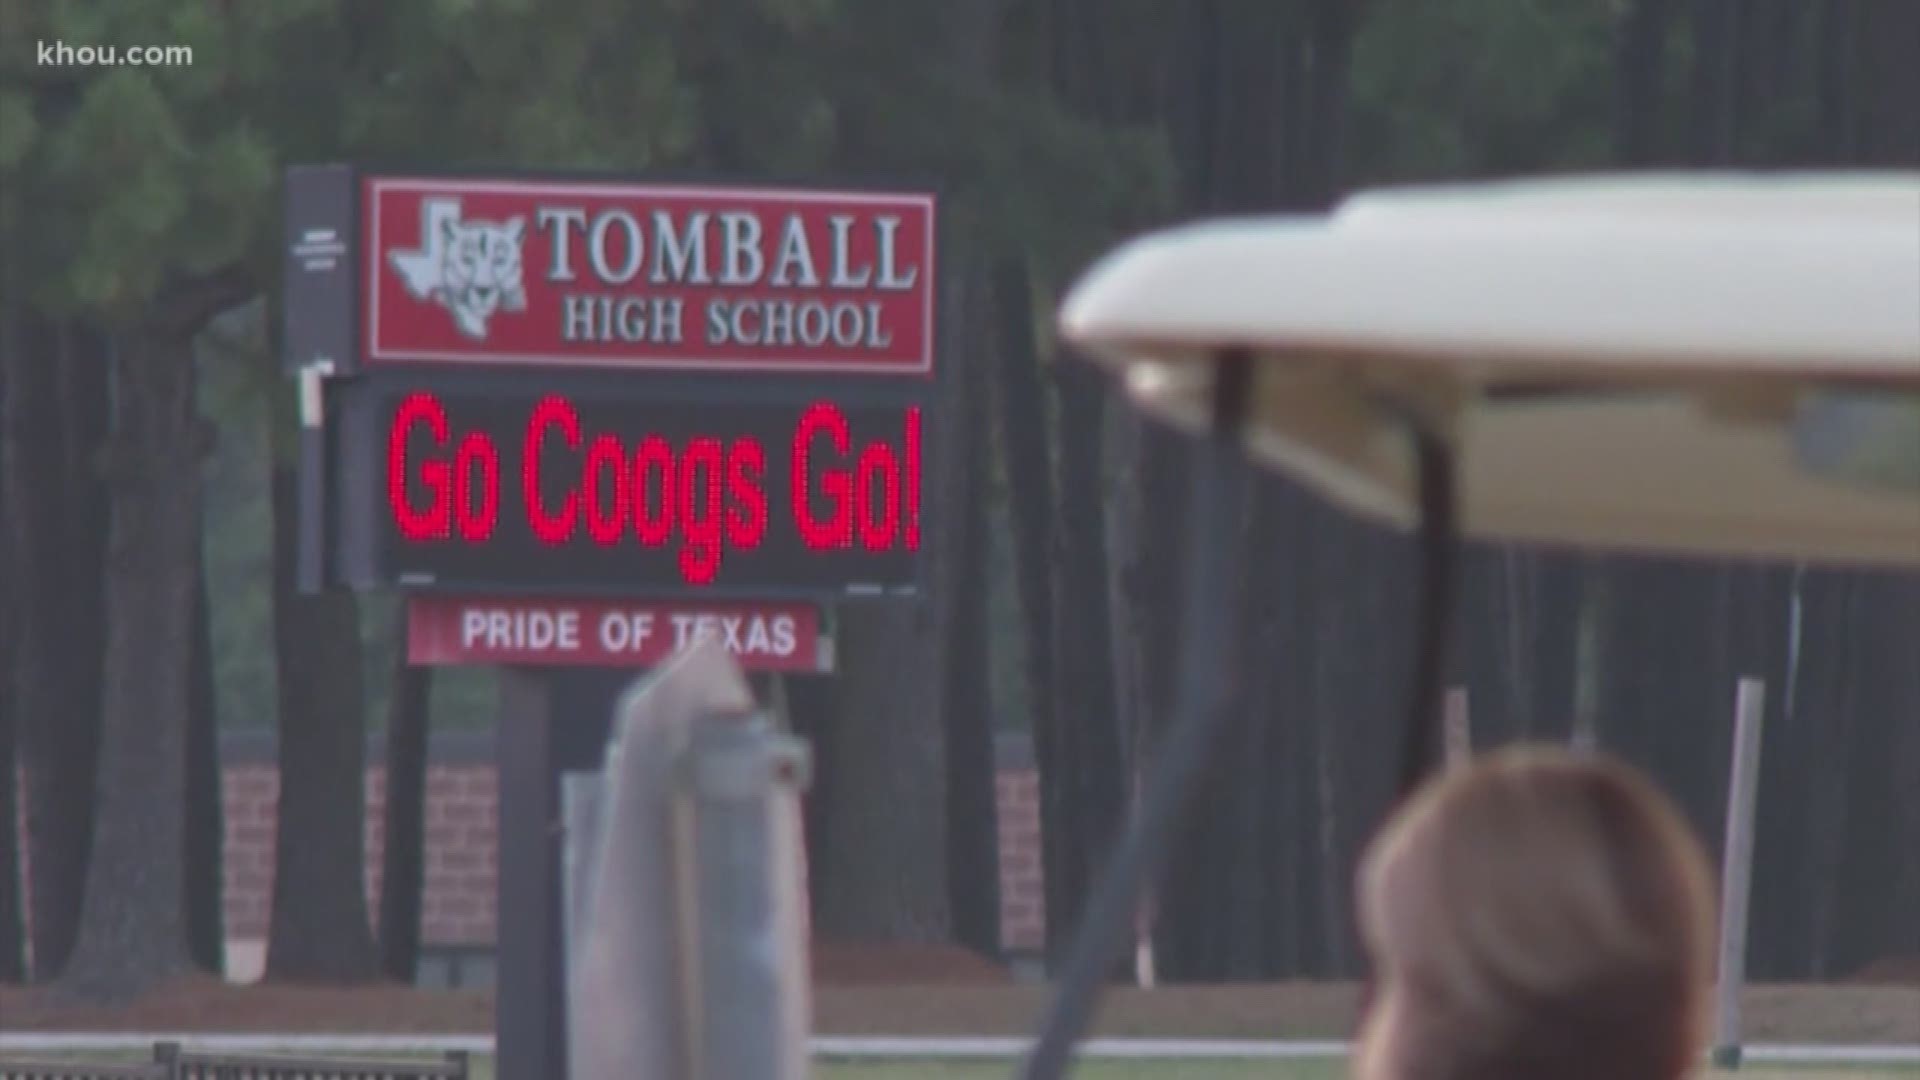 A student at Tomball High School was rushed to the hospital Monday evening after passing out.